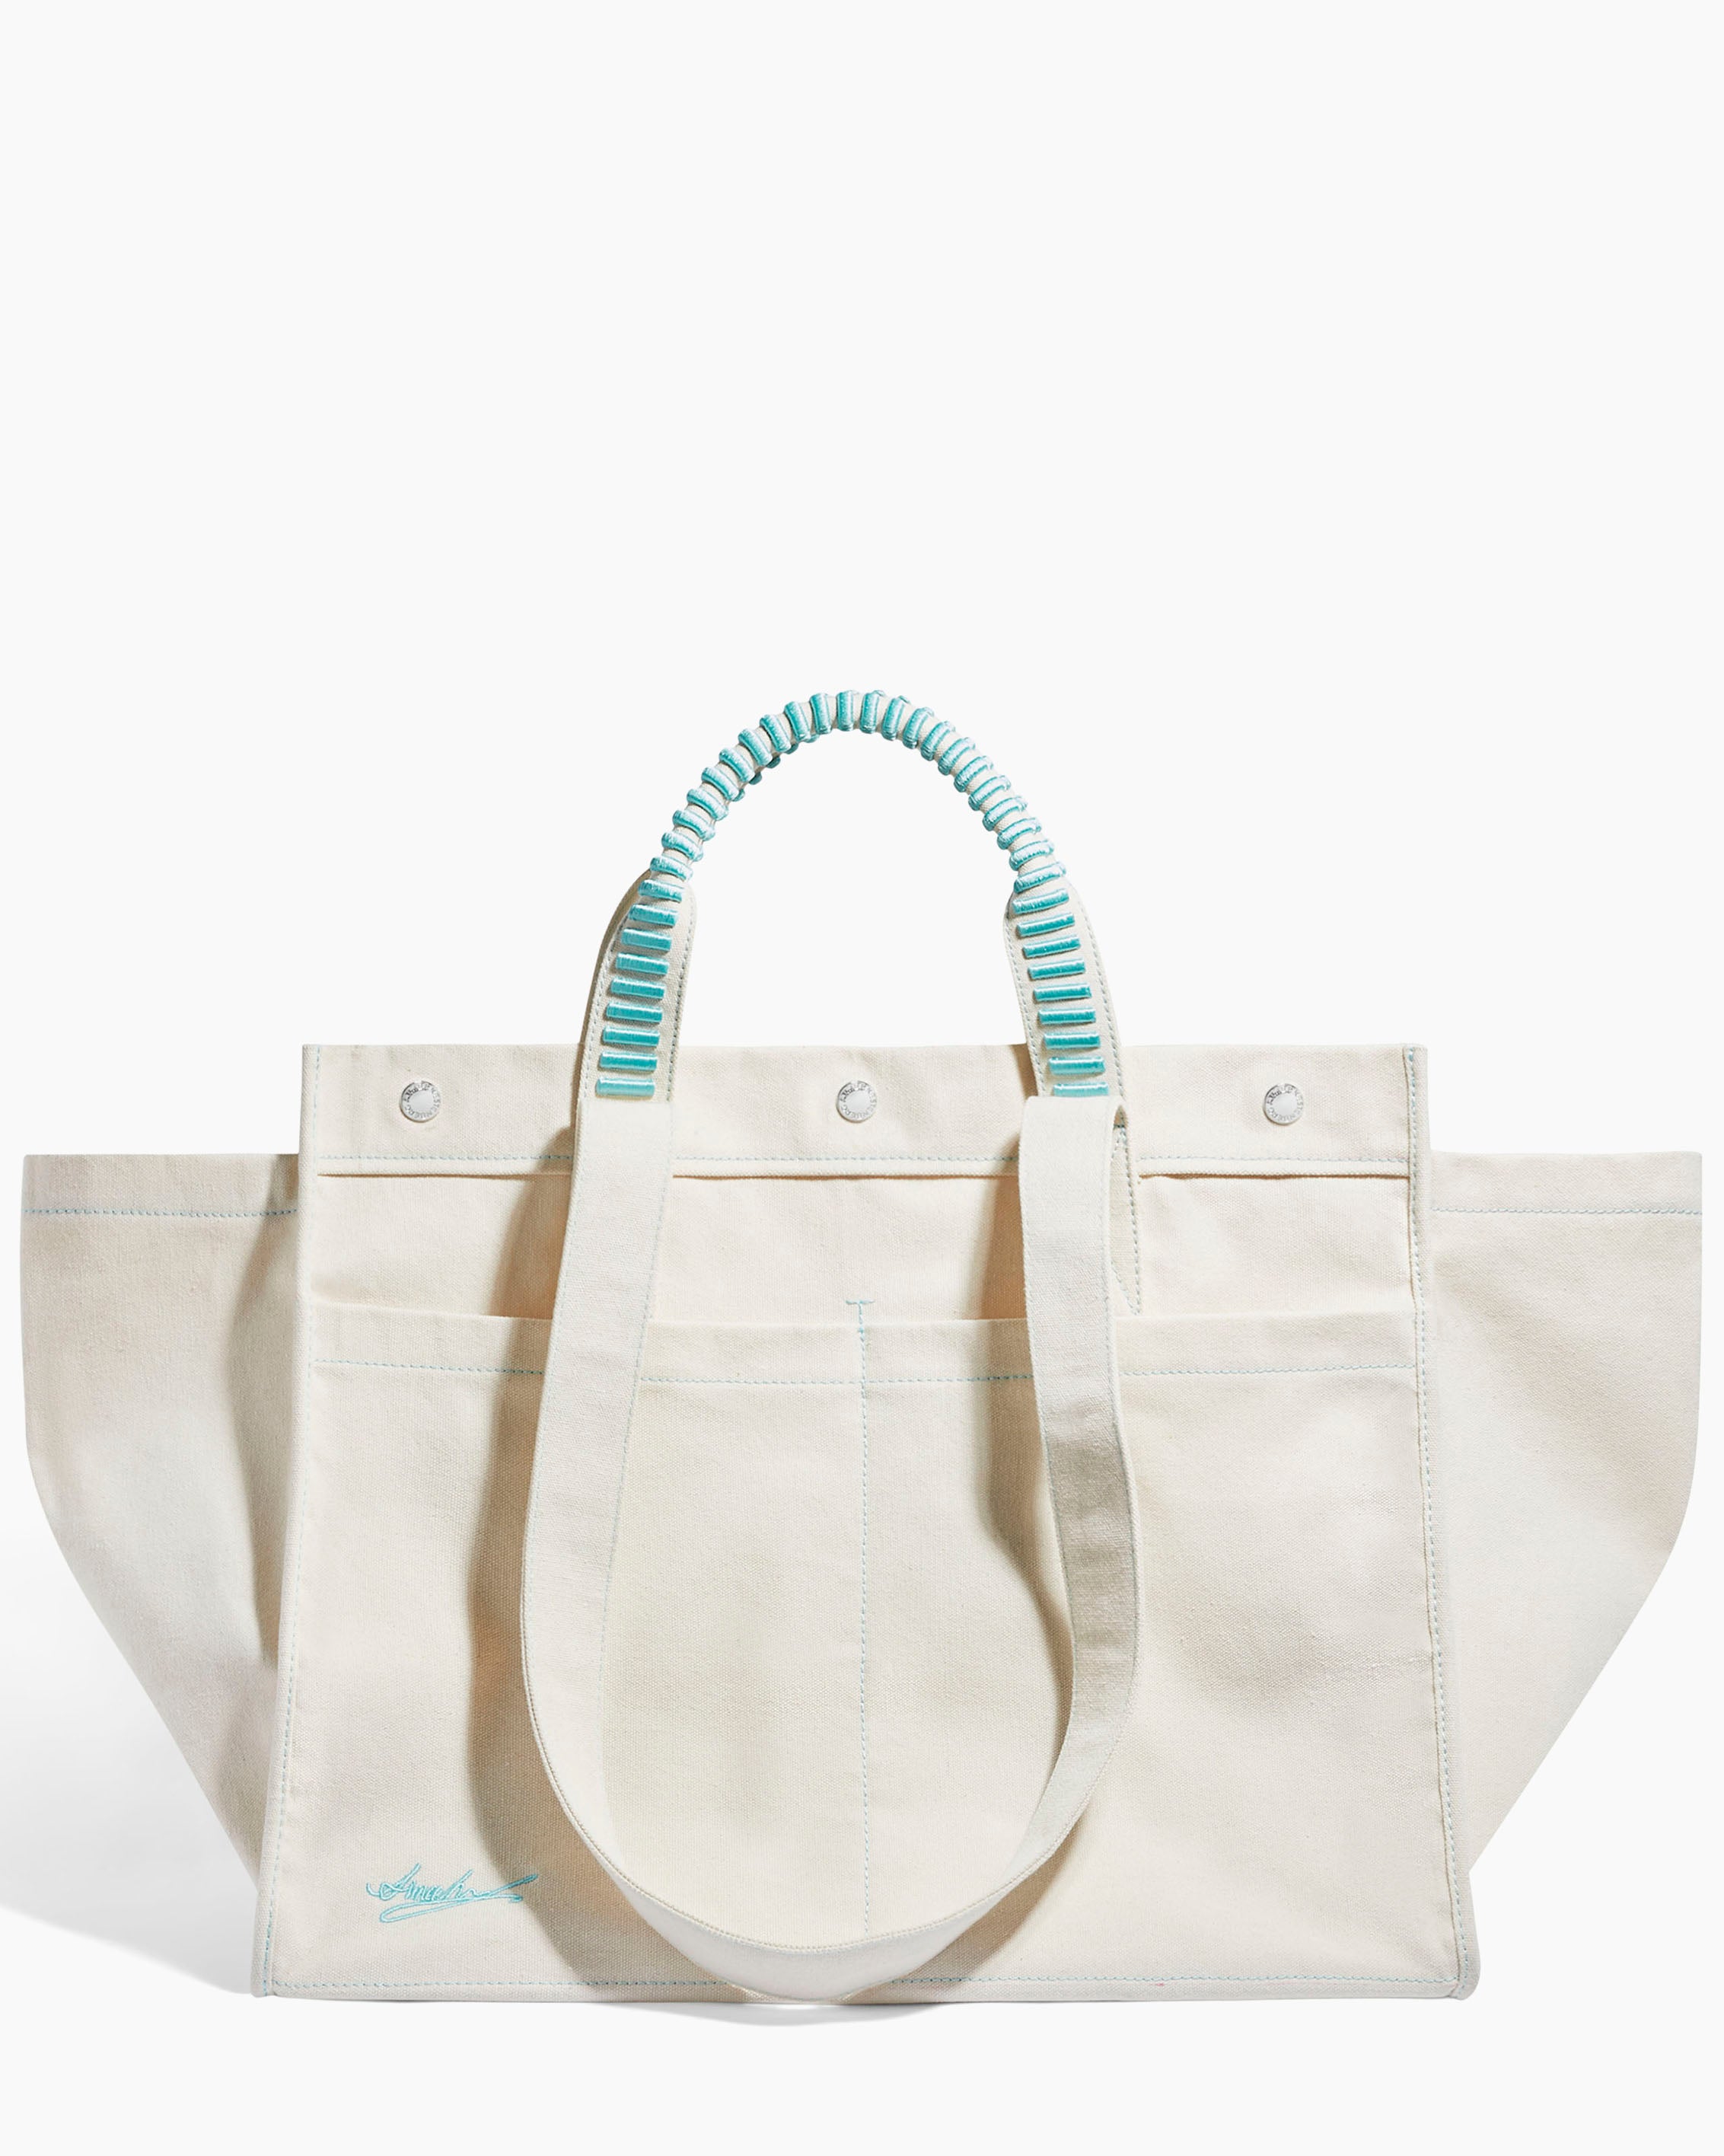 You asked and we listened. The Brie tote bag is now restocked in four  amazing hues online at www.ChristyNg.com & in all stores today…